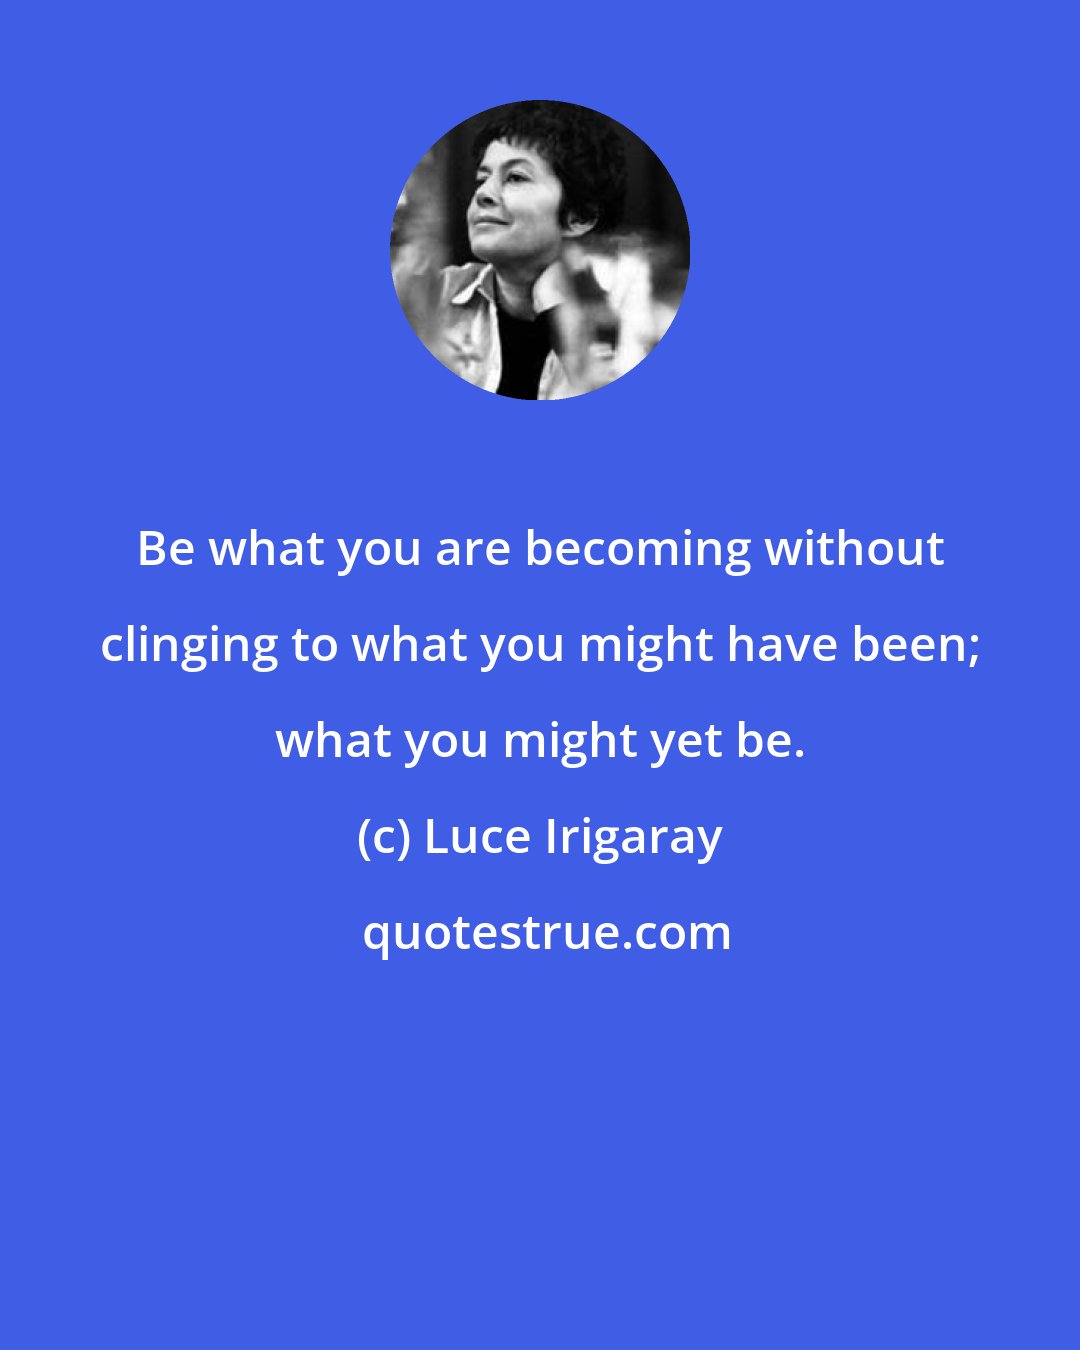 Luce Irigaray: Be what you are becoming without clinging to what you might have been; what you might yet be.